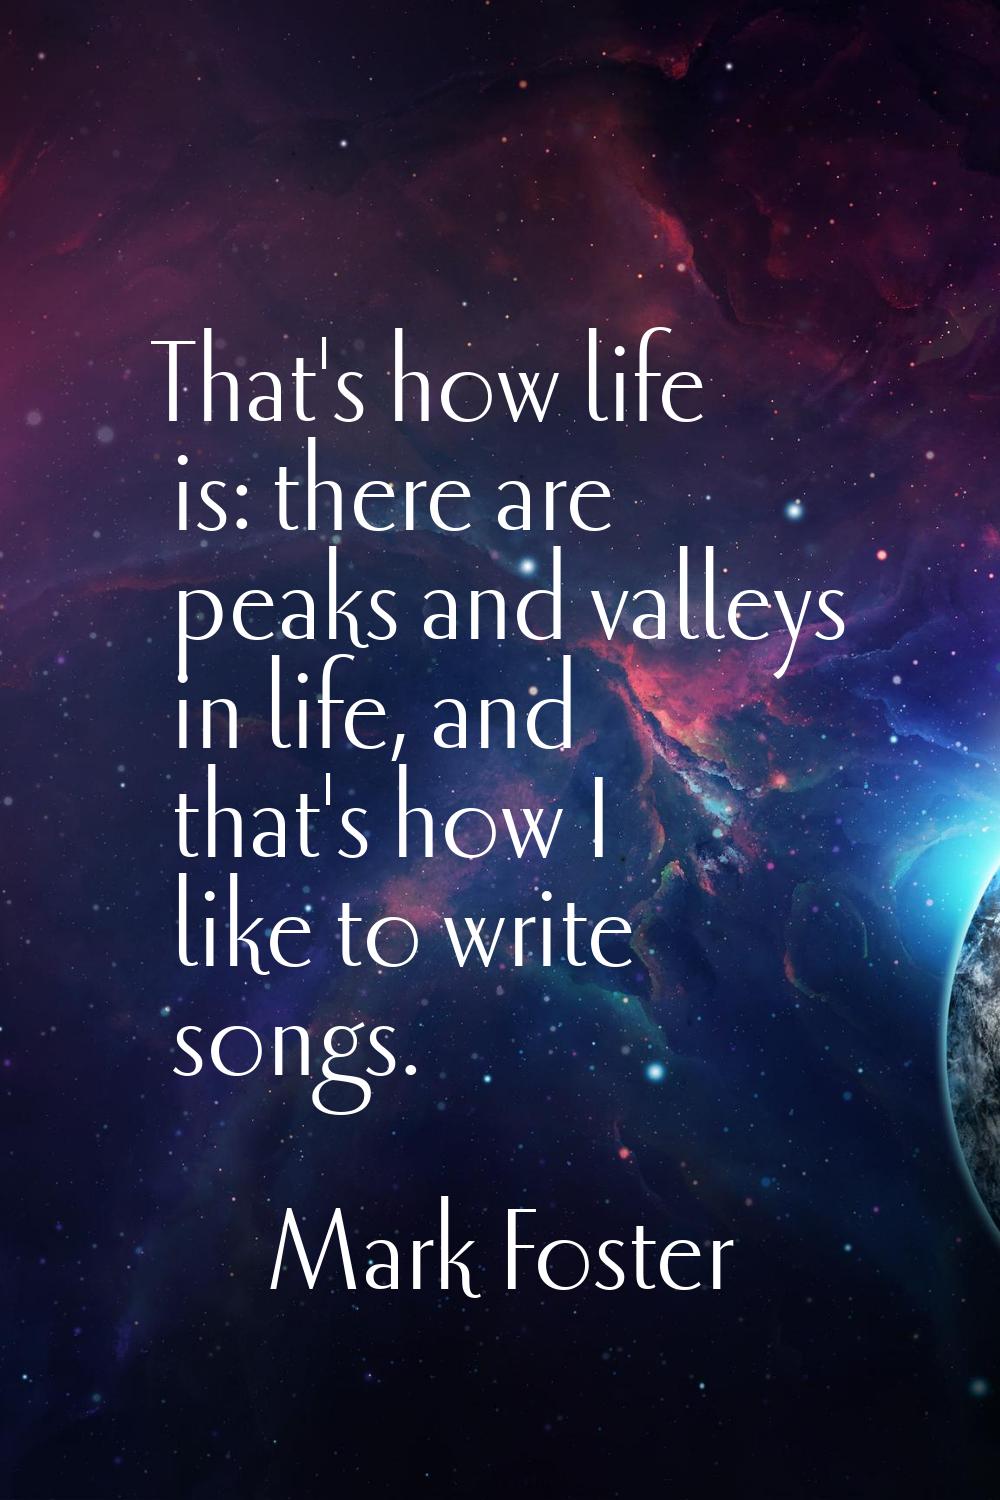 That's how life is: there are peaks and valleys in life, and that's how I like to write songs.